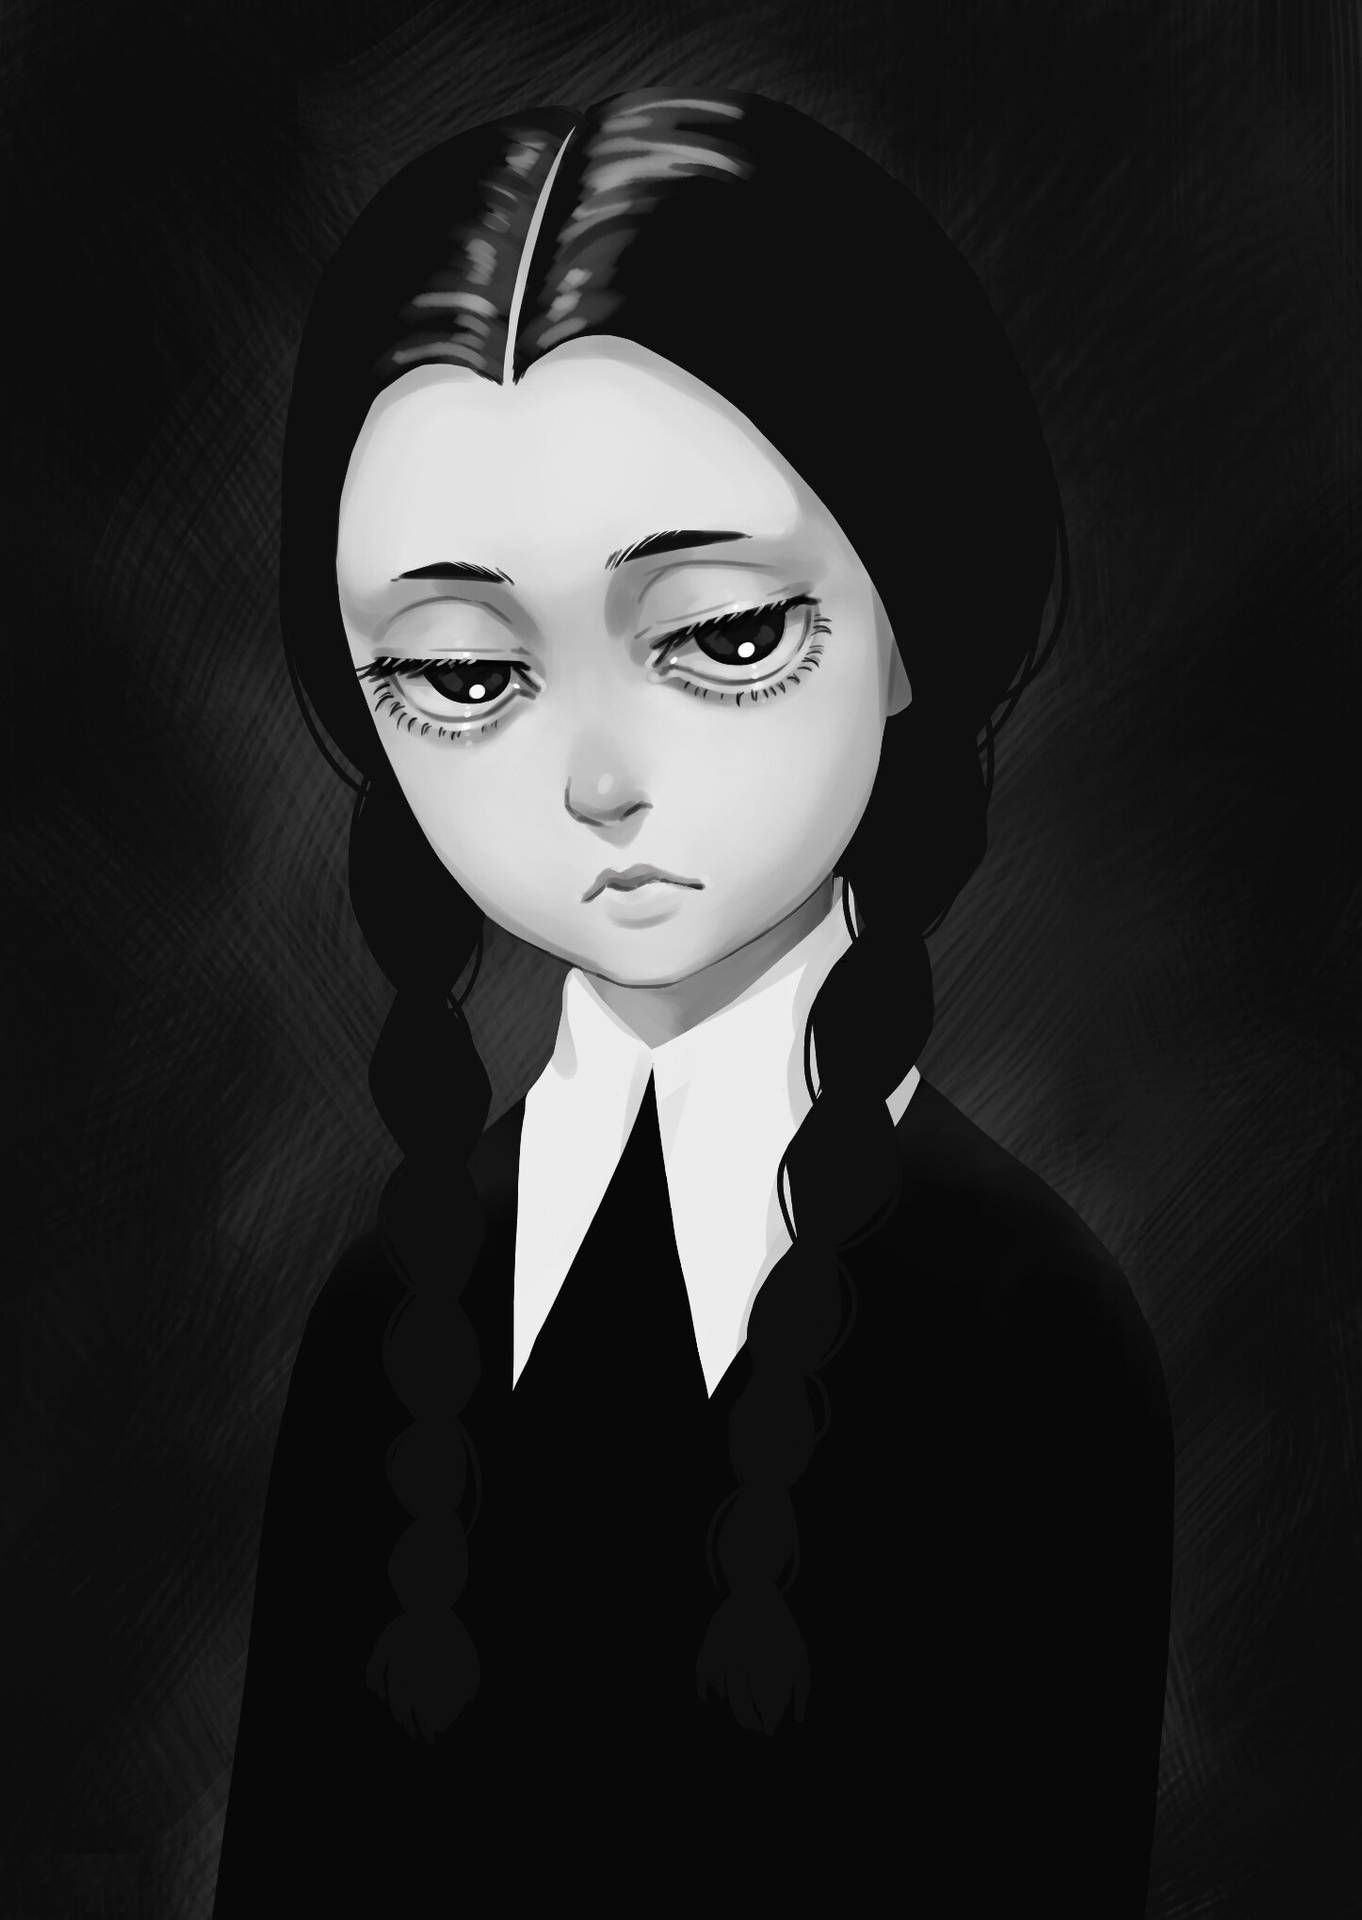 Wednesday Addams from the 2019 animated series. - Wednesday